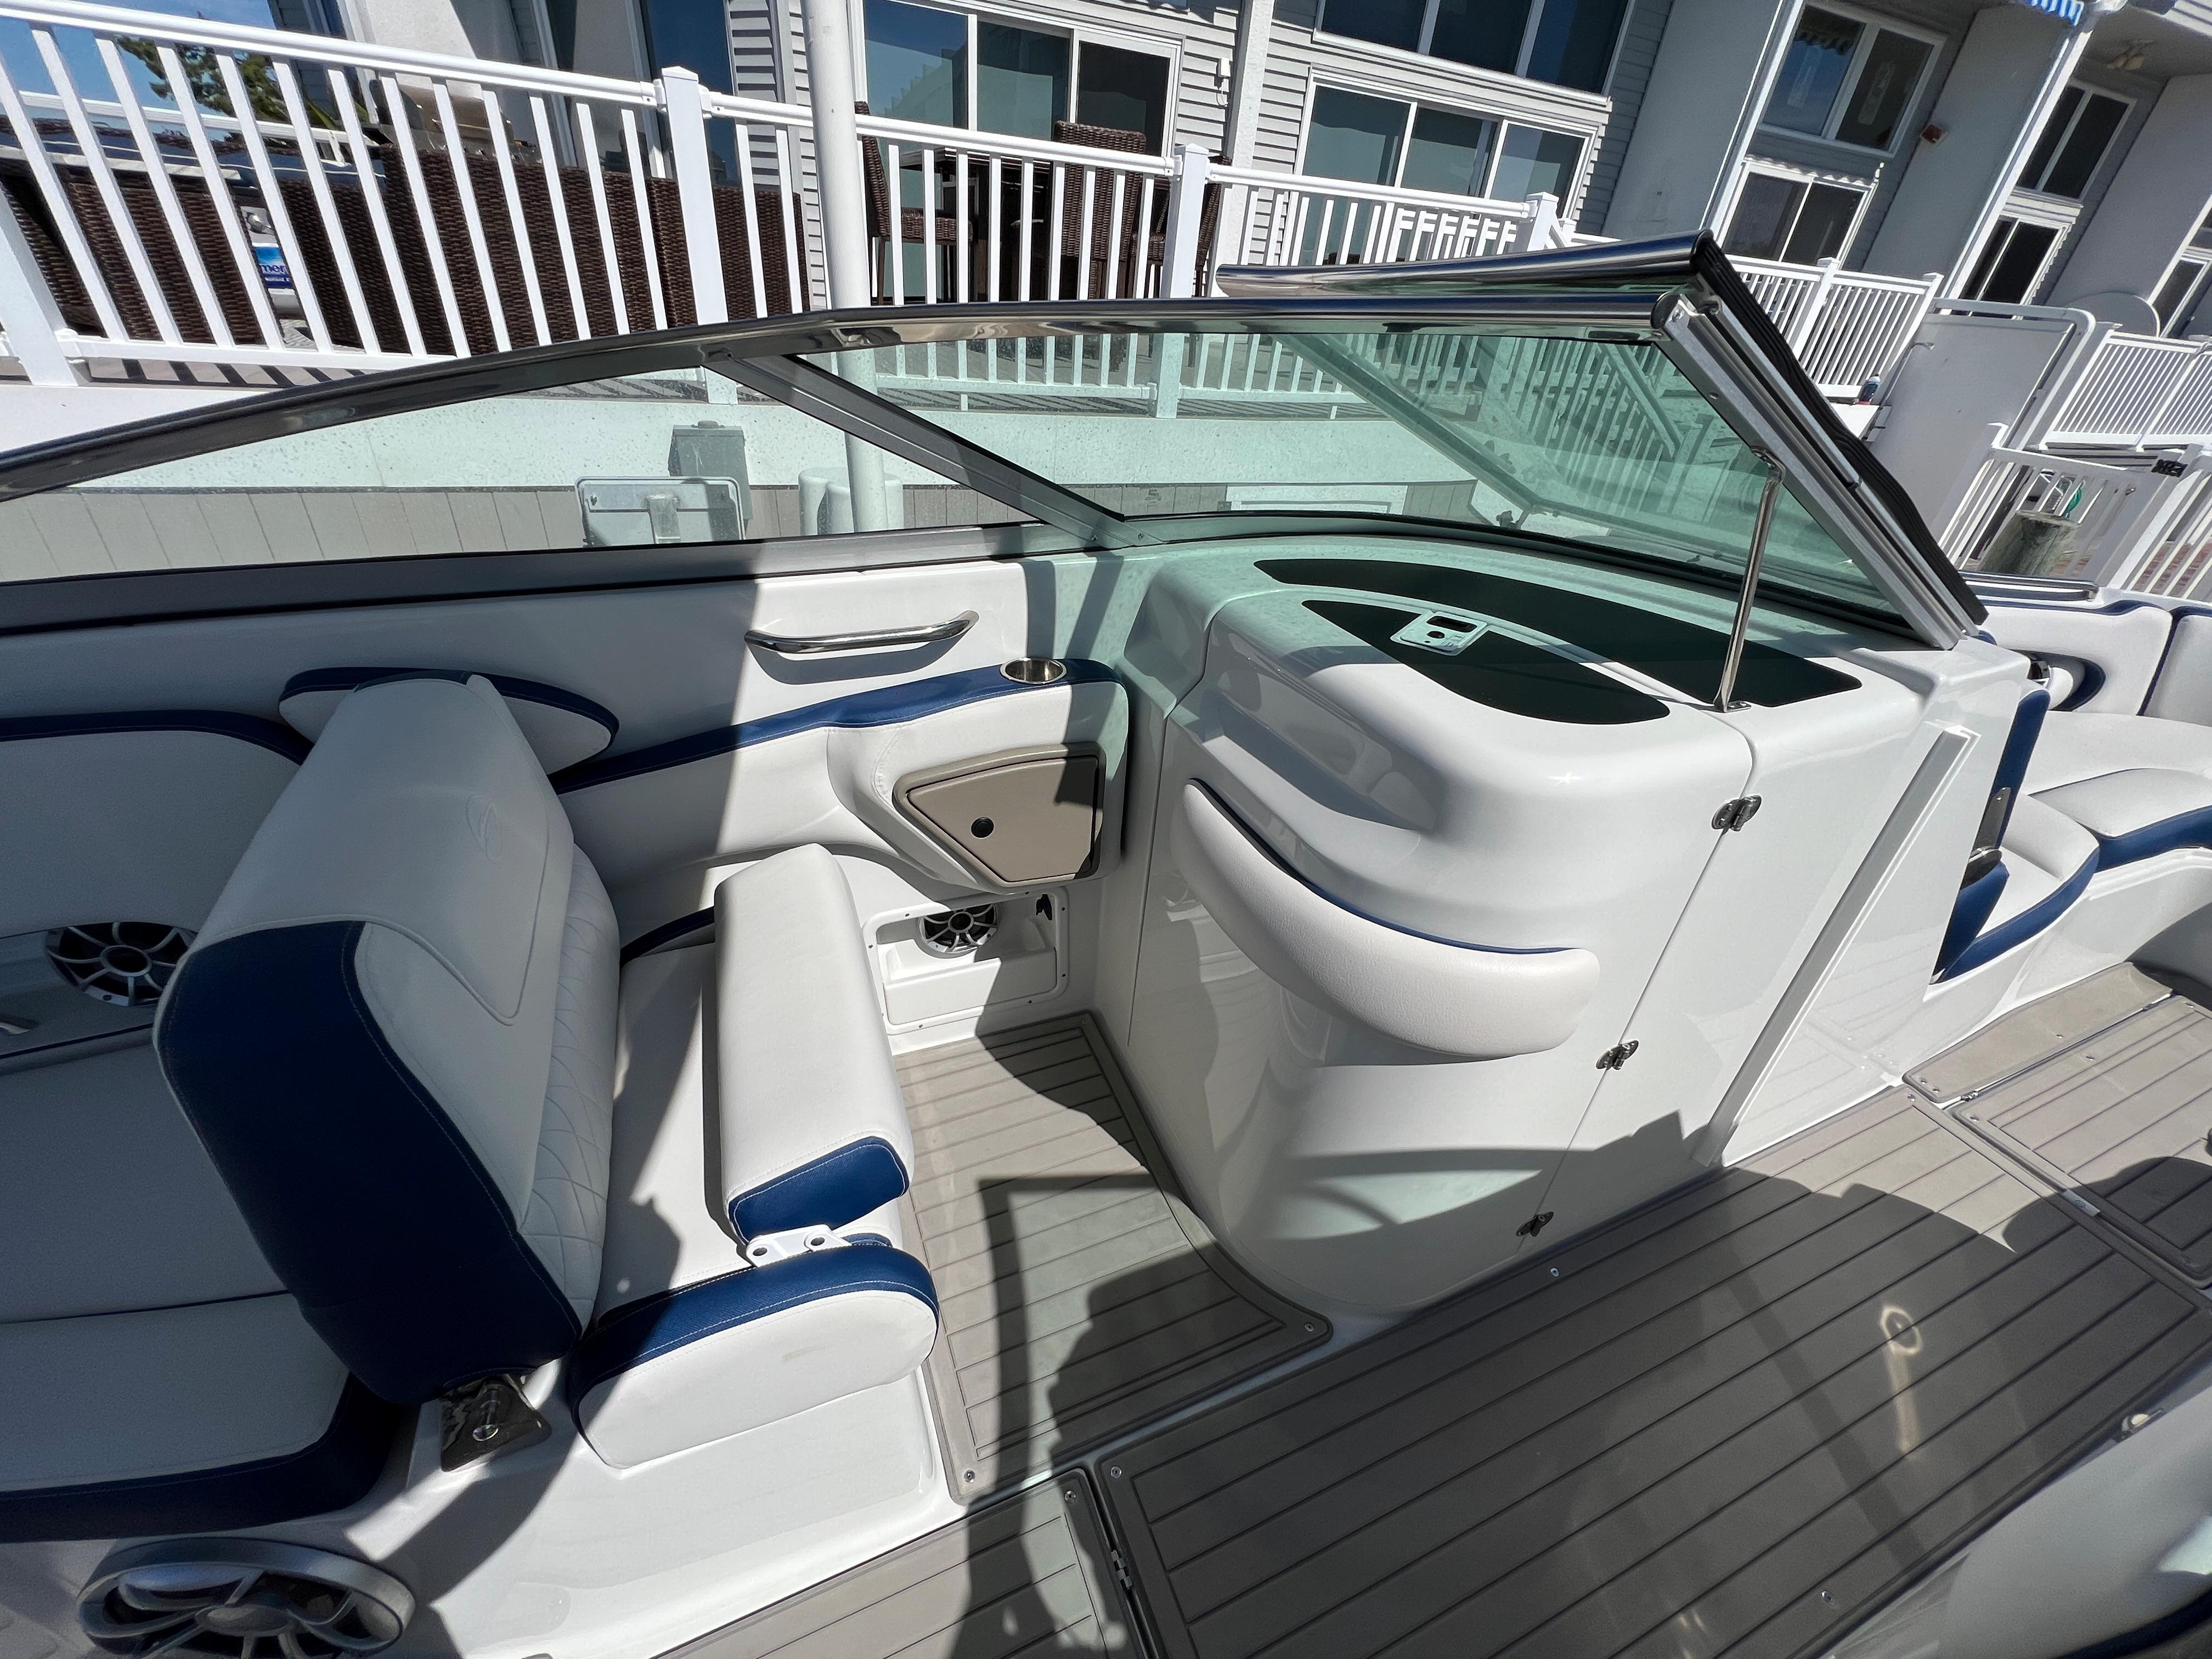 2022 Crownline E305 XS Port Helm Seating